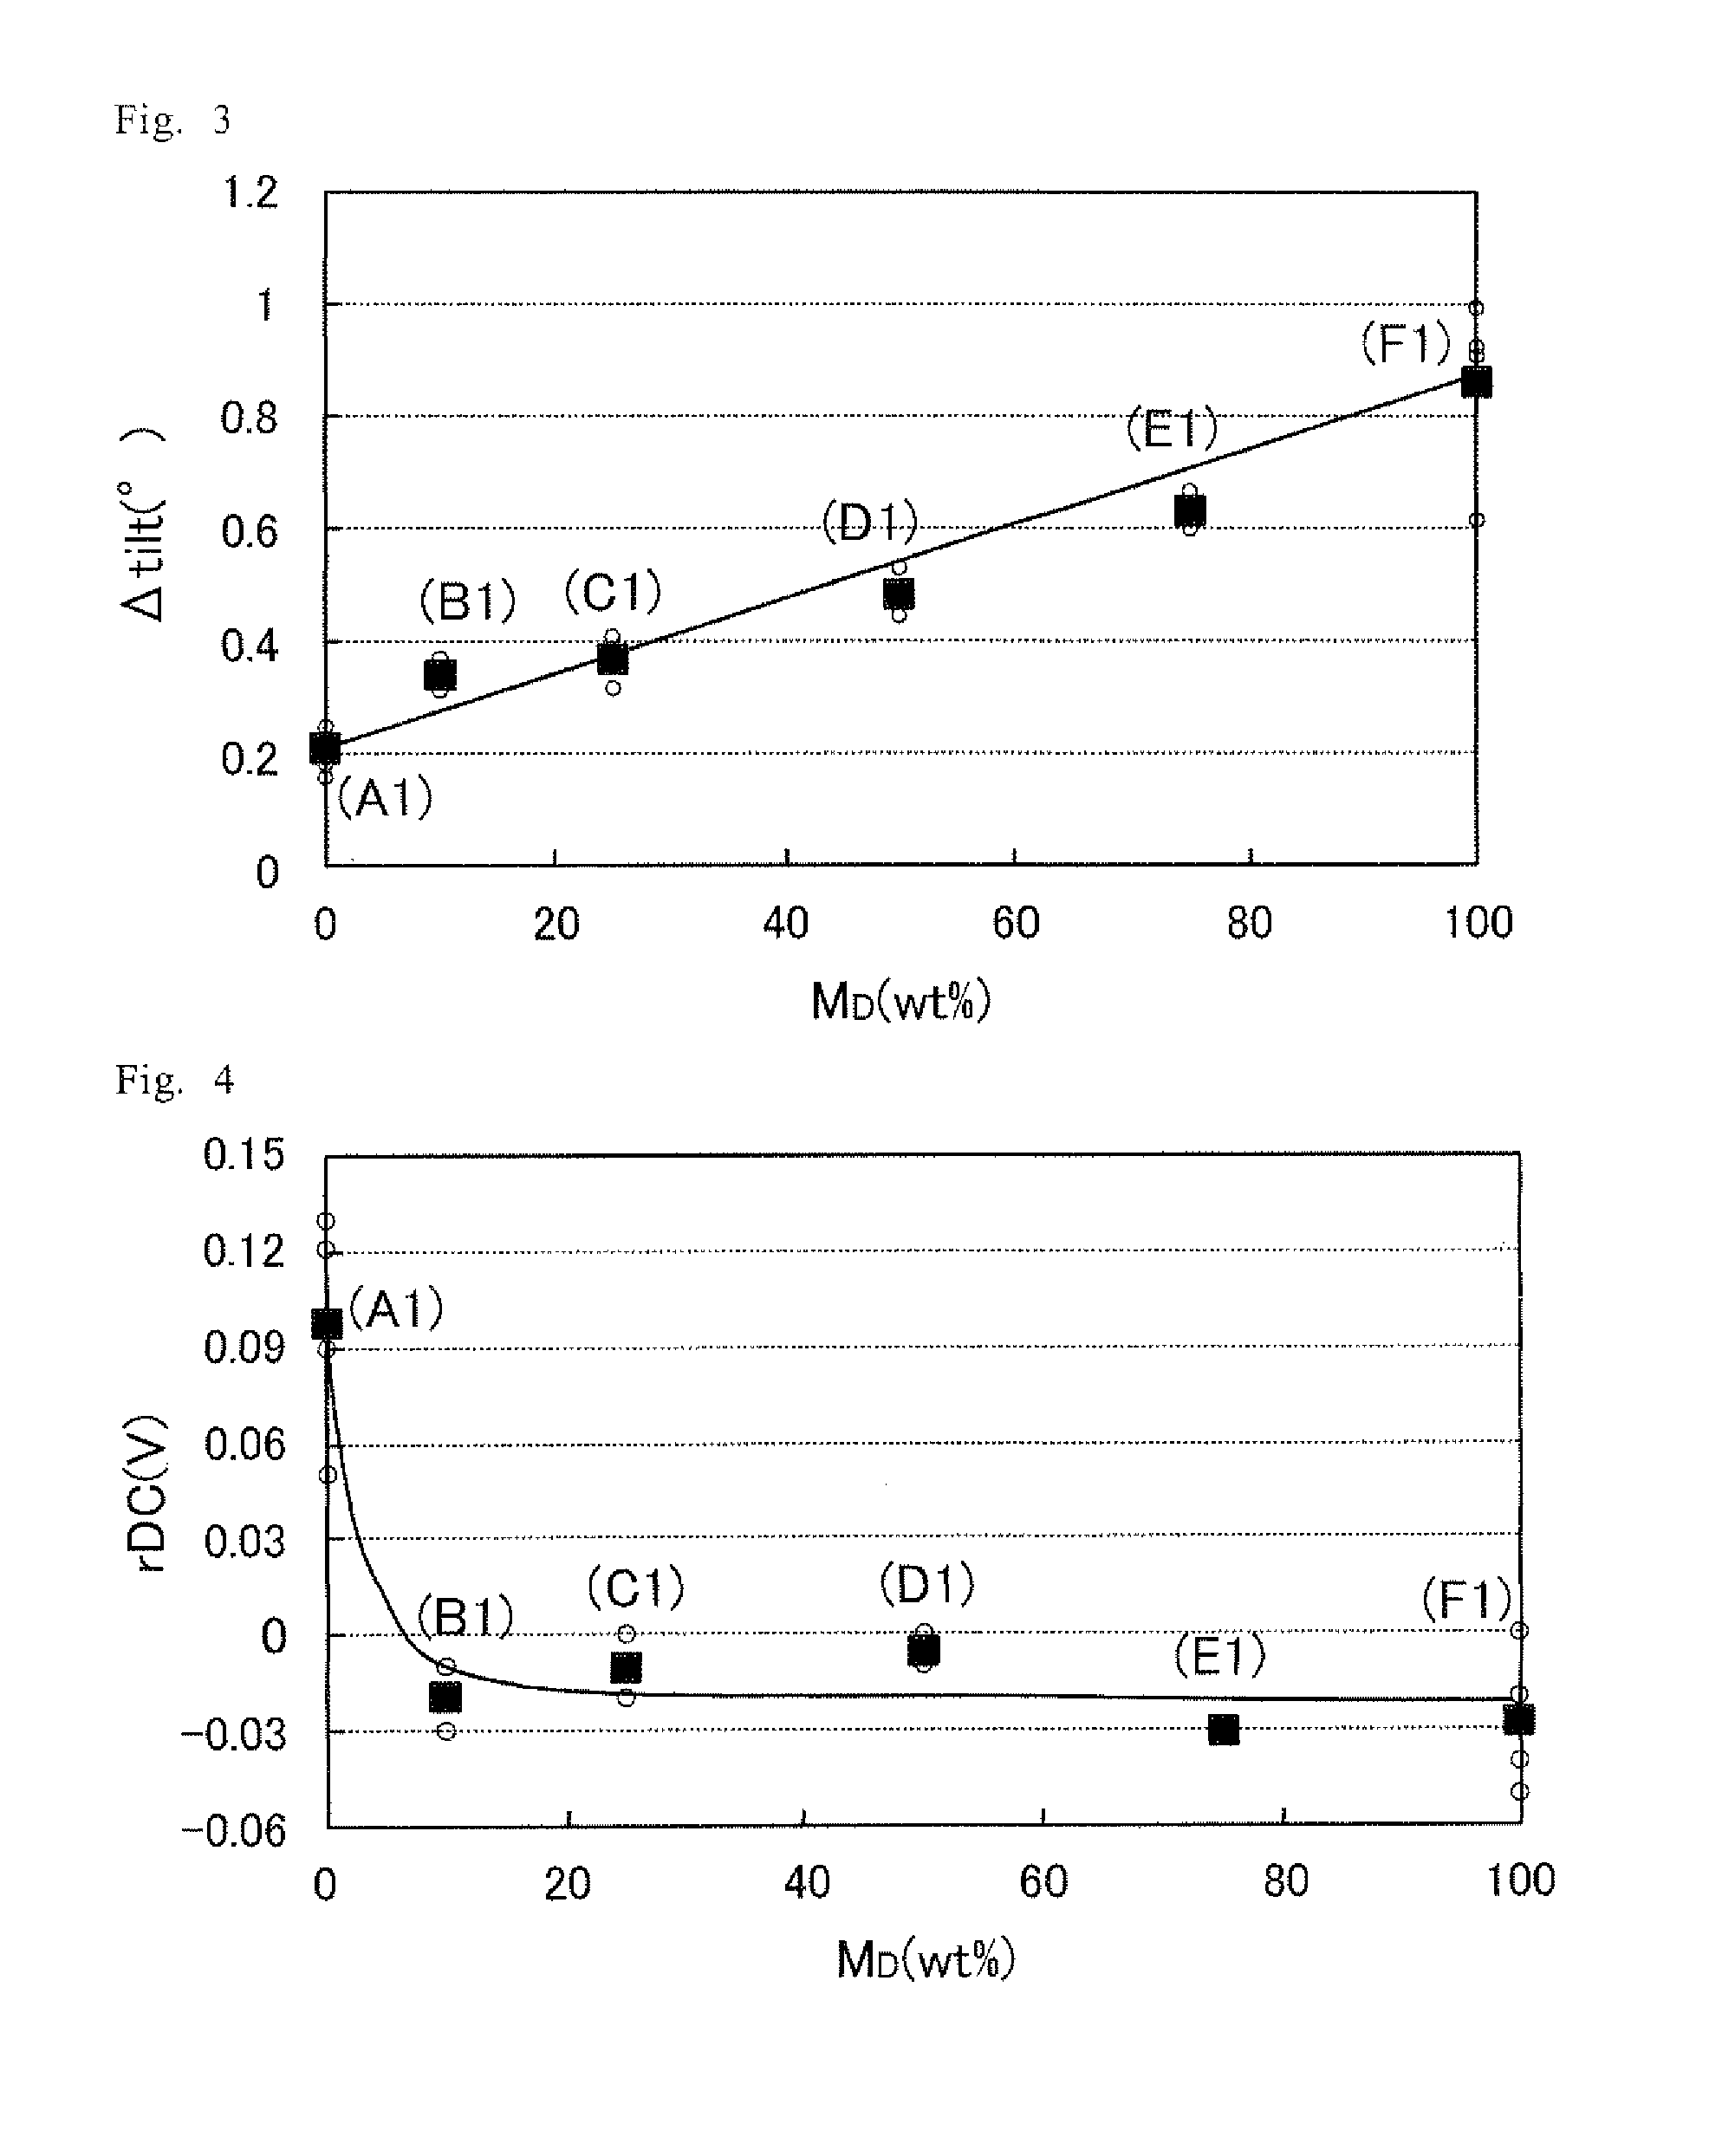 Liquid crystal display device, process for producing liquid crystal display device, composition for forming polymer layer, and composition for forming liquid crystal layer